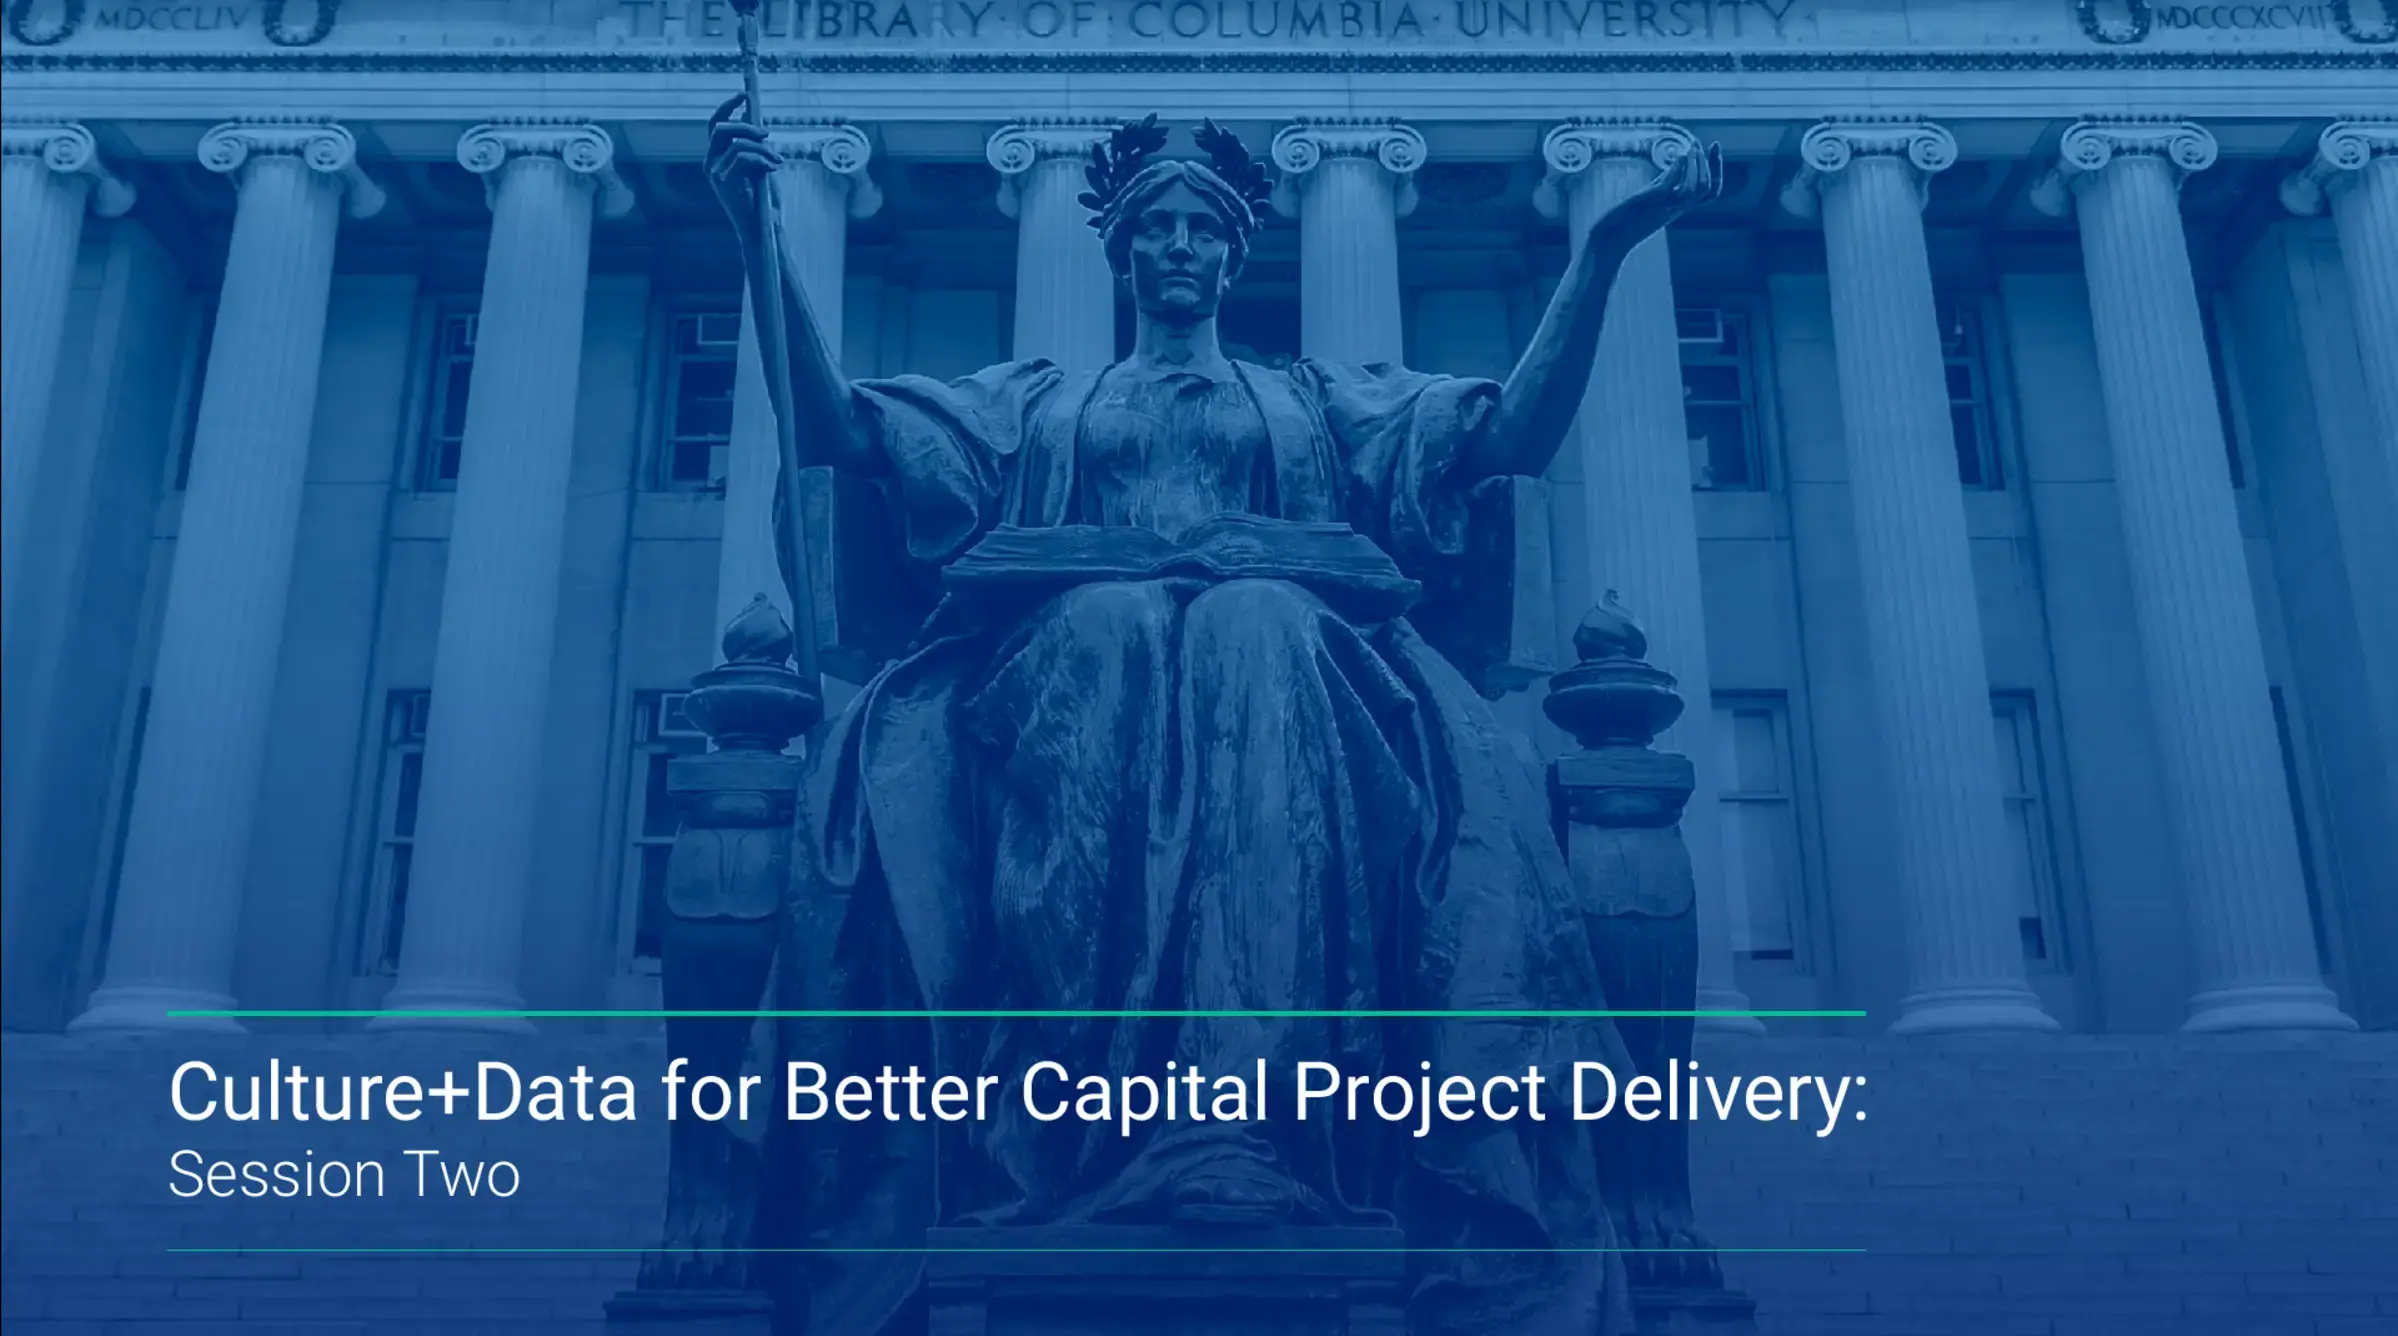 A cover image for a video recording of "Culture+Data for Better Capital Project Delivery – Session 2."